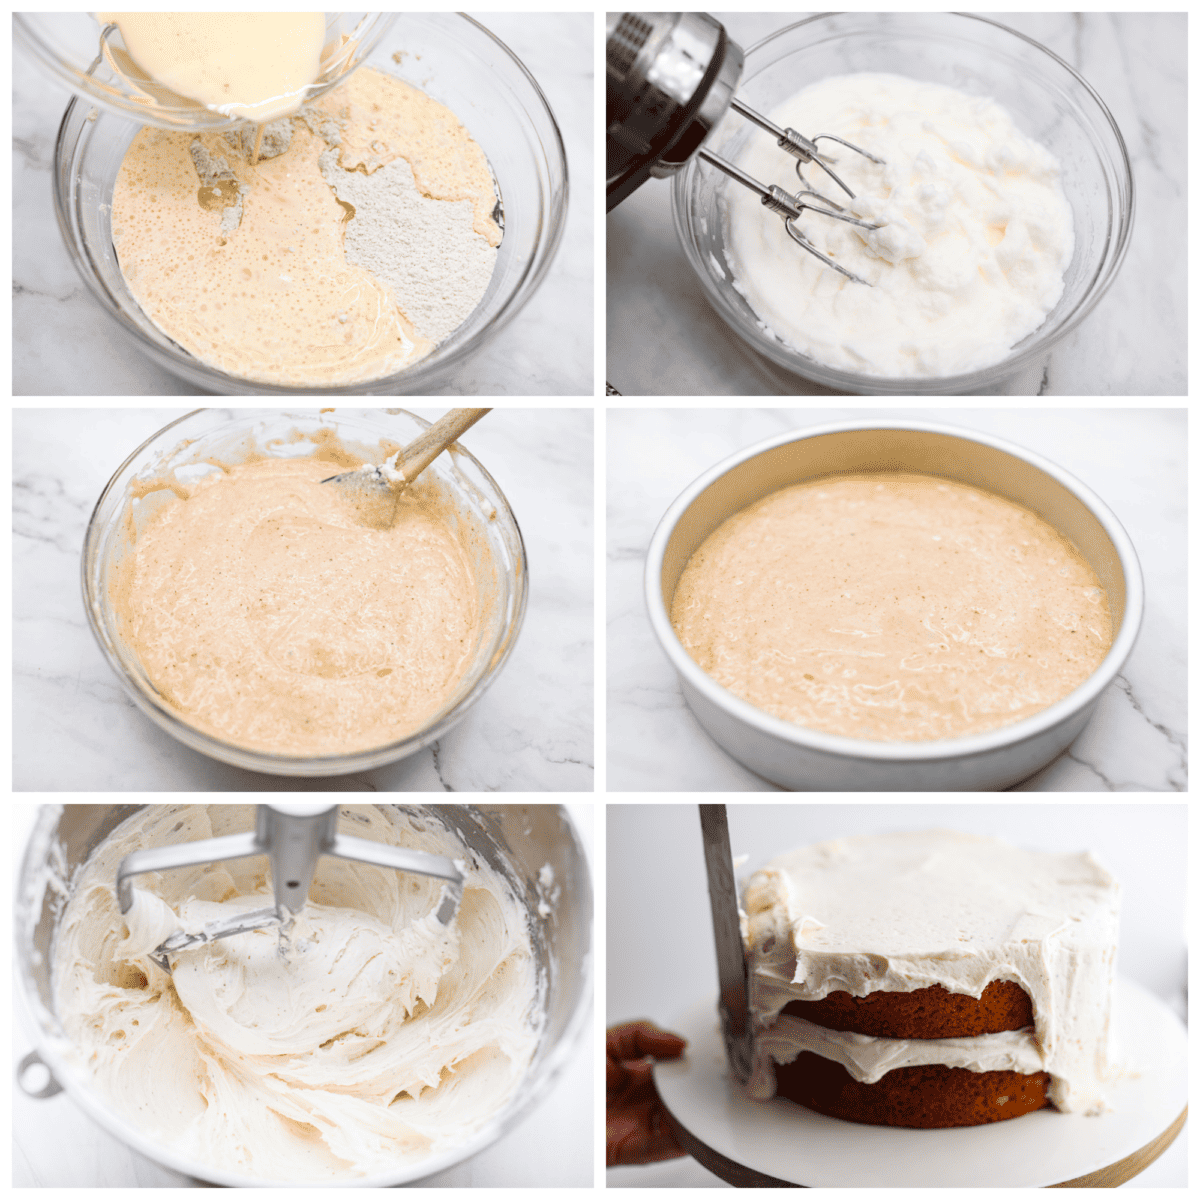 First photo of the wet ingredients combining with the dry ingredients. Second photo of the egg whites being whipped. Third photo of the egg whites folded into the batter. Fourth photo of the batter in a cake pan. Fifth photo of the buttercream mixed in a stand mixer. Sixth photo of the cake layers being frosted. 